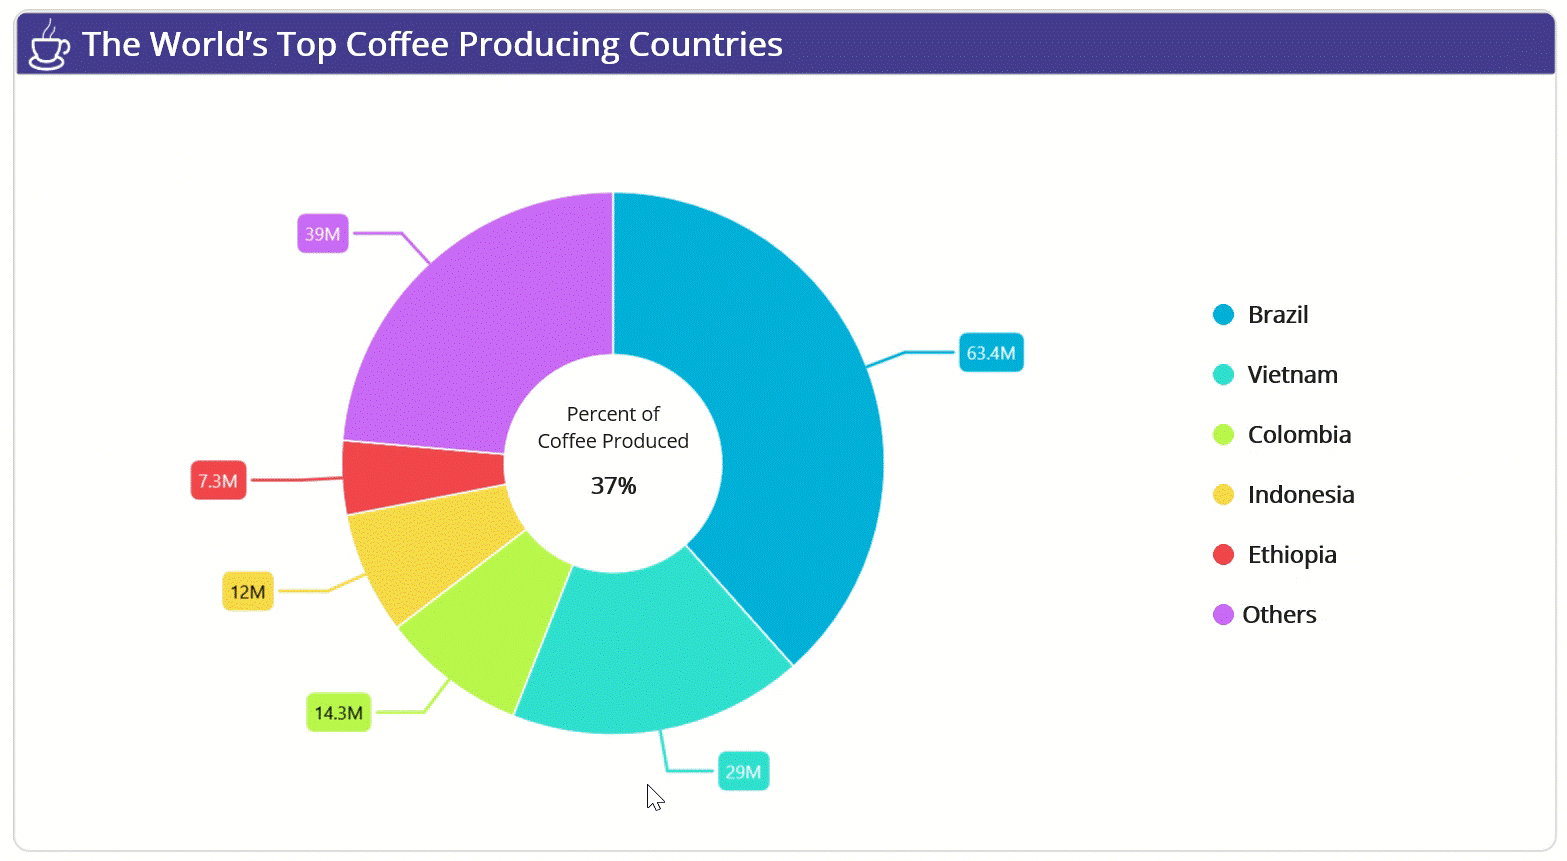 Visualizing Top Coffee-Producing Countries’ Data Using the Syncfusion .NET MAUI Doughnut Chart